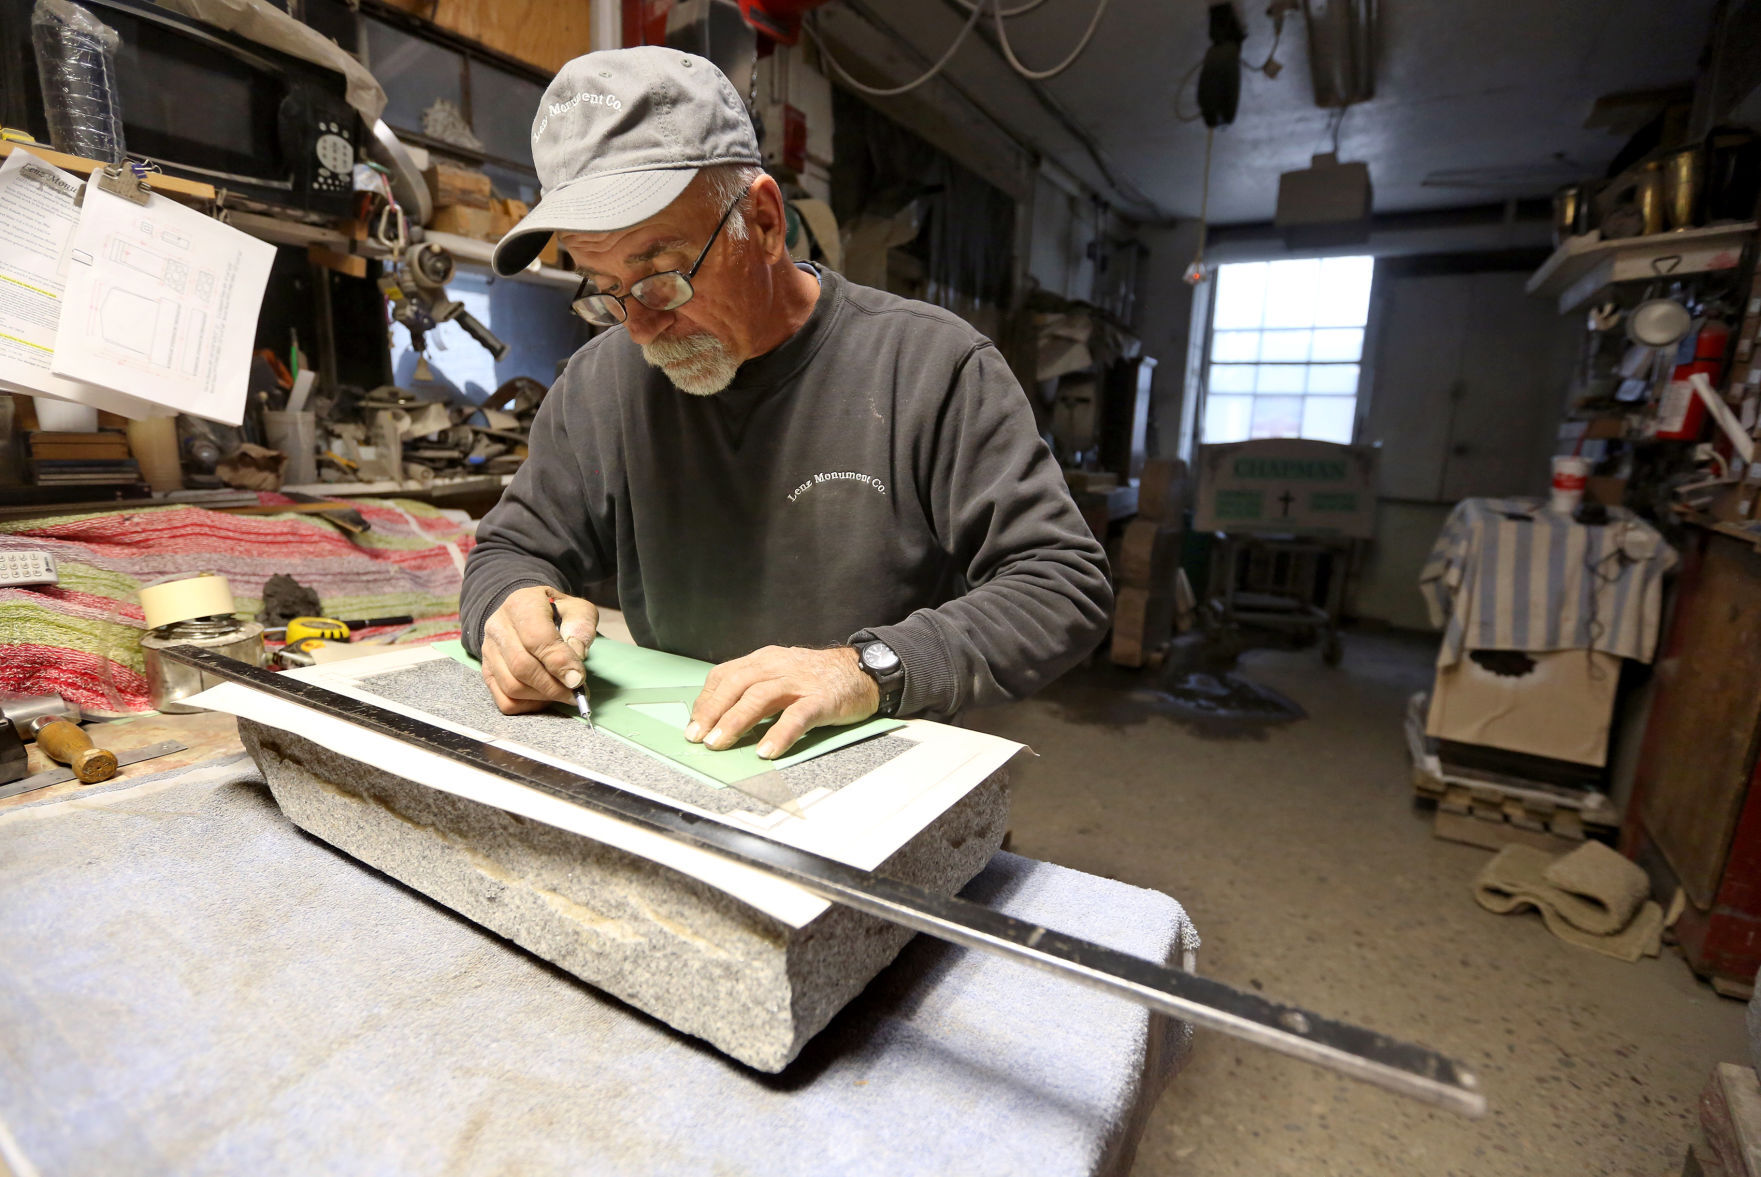 Rich Neuses works on a headstone Friday at Lenz Monument Co. in Dubuque. PHOTO CREDIT: JESSICA REILLY